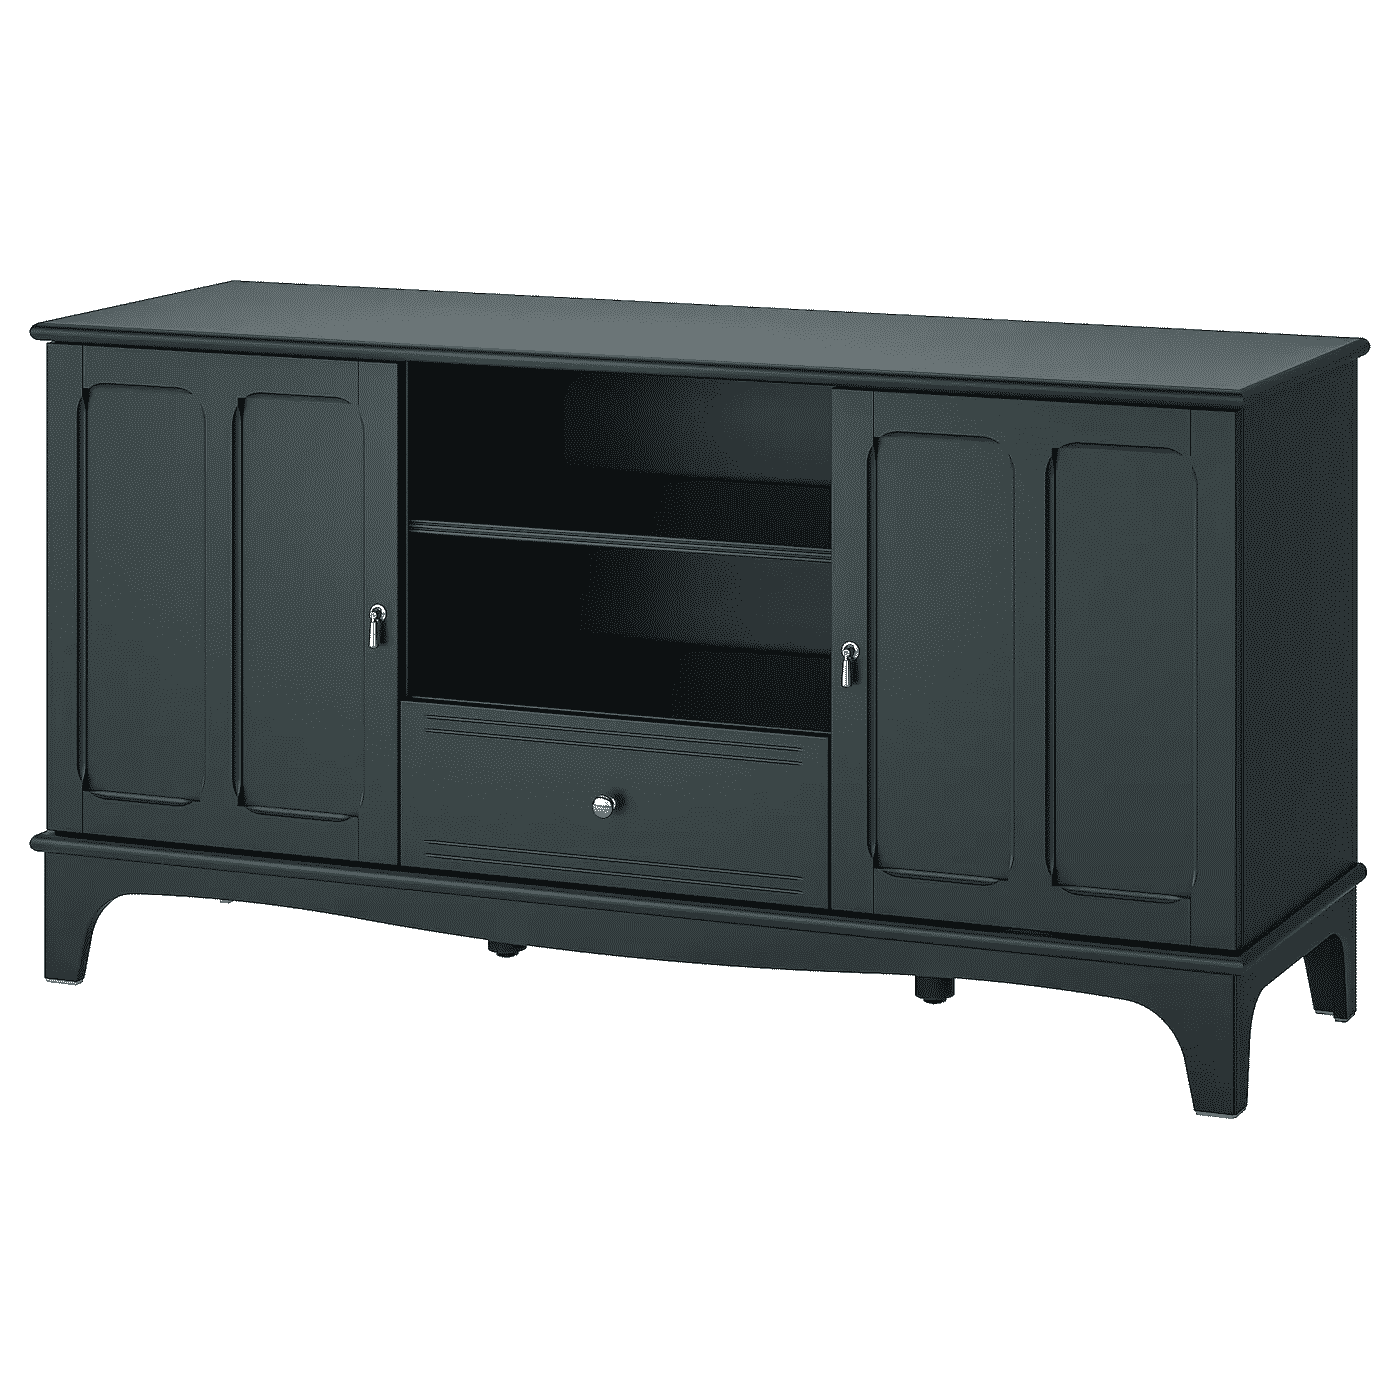 Featured image of post Metal Tv Stand Ikea : Browse our selection ofsmall tv stands with storage, which come in various sizes, finishes, and styles to fit any room.